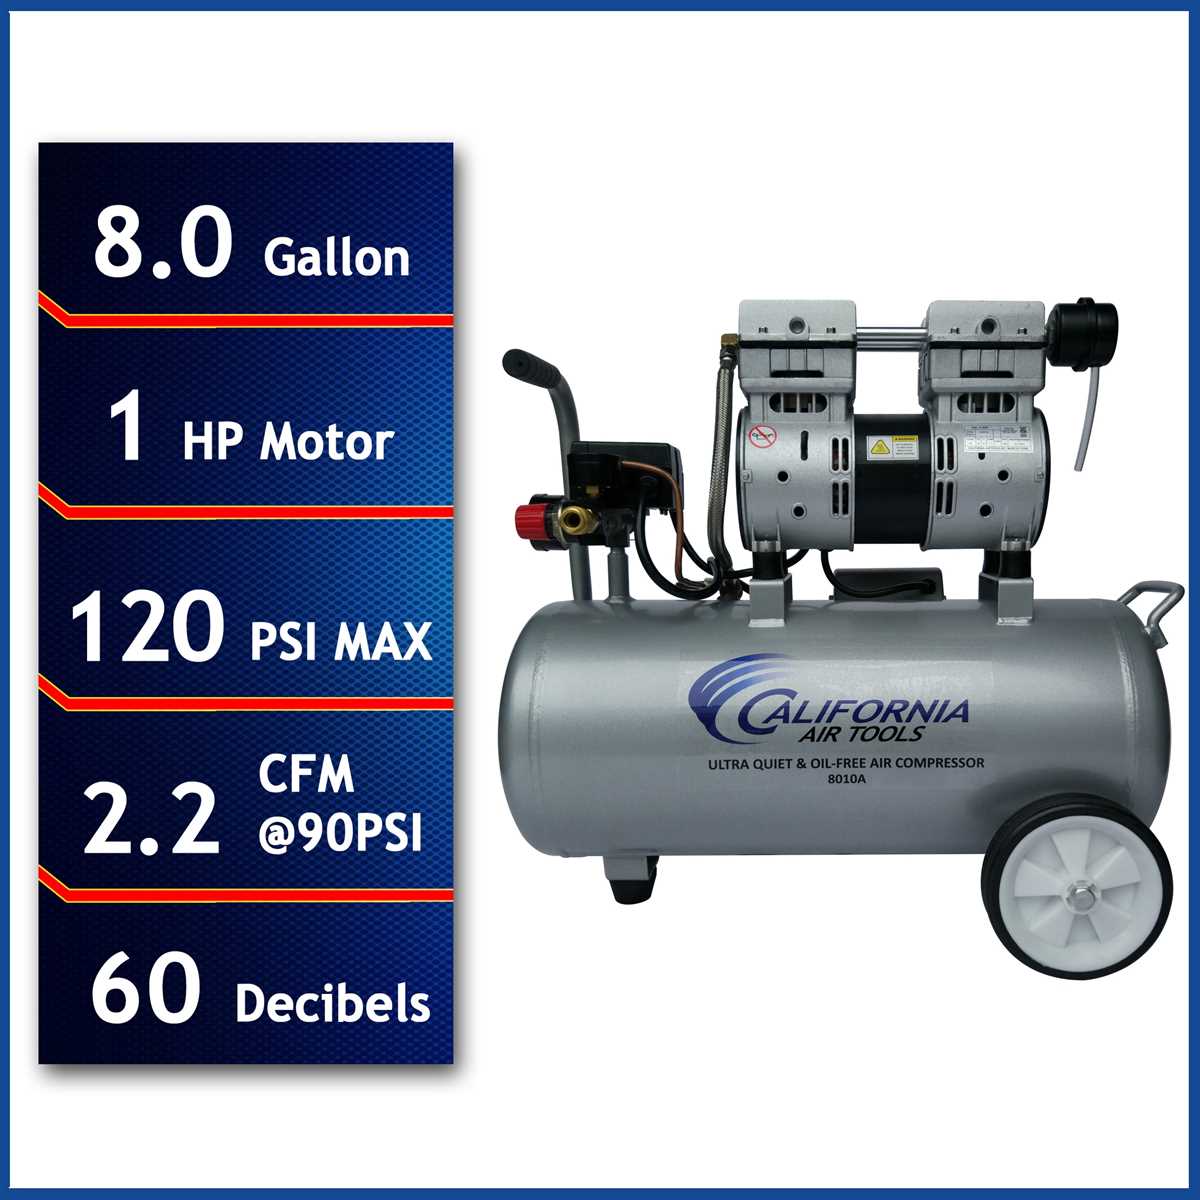 Tips for Determining the Right Gallon Capacity for Your Needs